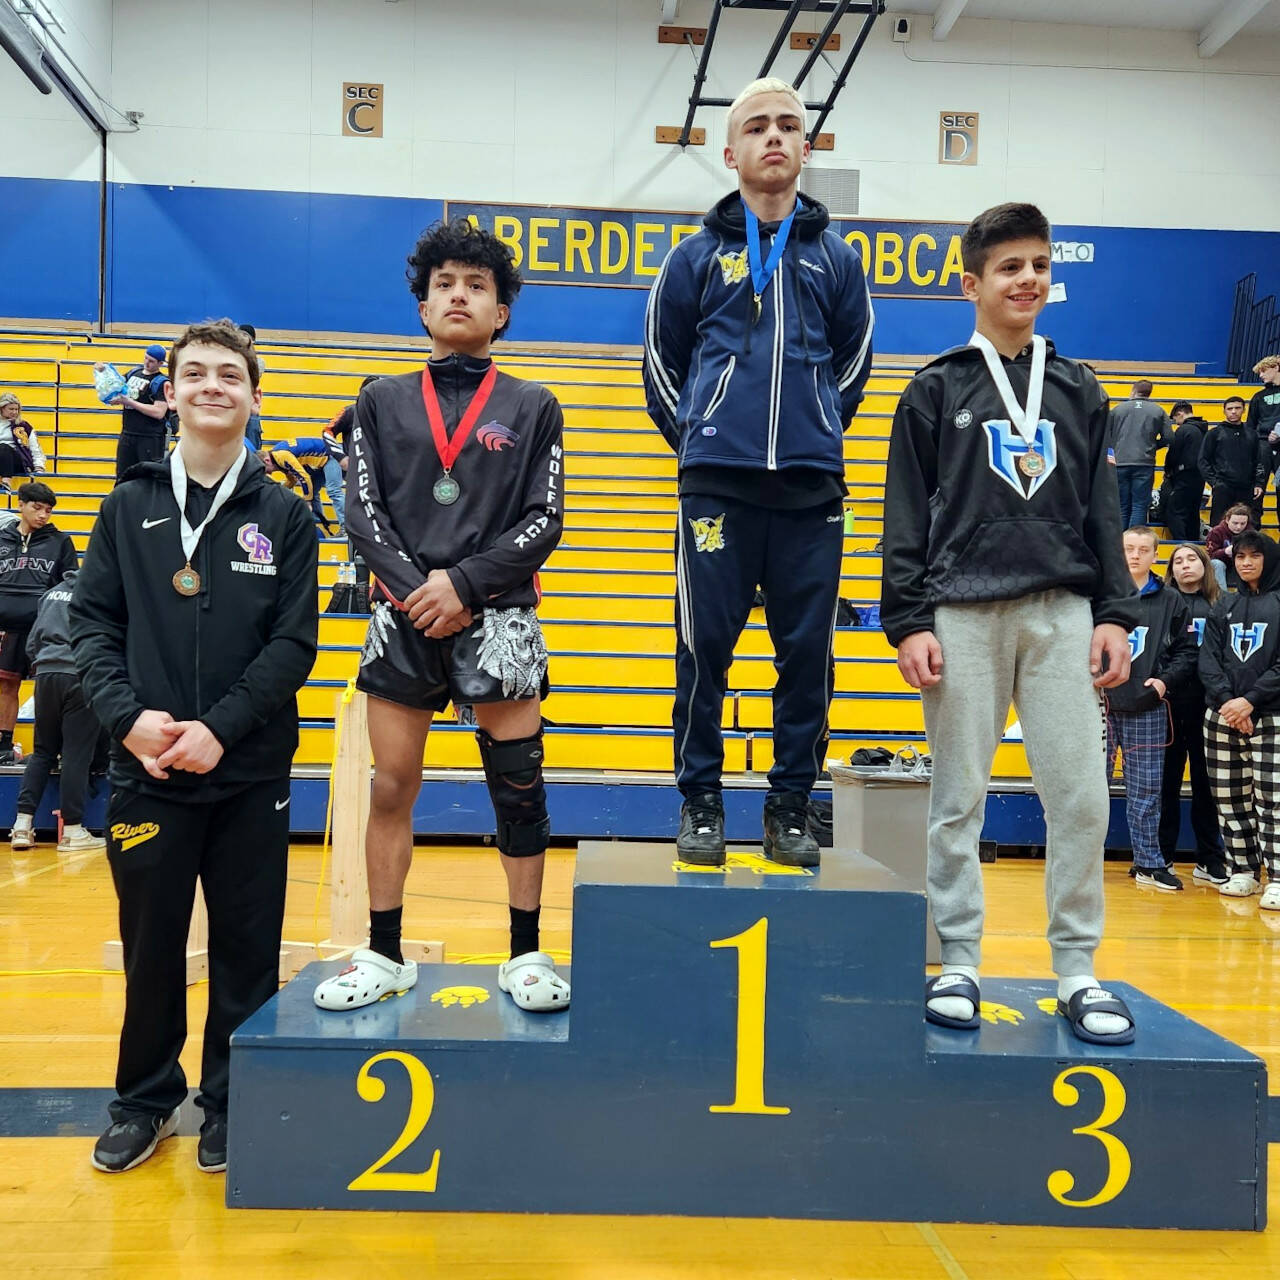 SUBMITTED PHOTO Aberdeen’s Talatheon Warness (1) stands atop the podium after winning the 106-pound championship at the 2A Region 3 Championships on Saturday in Aberdeen.